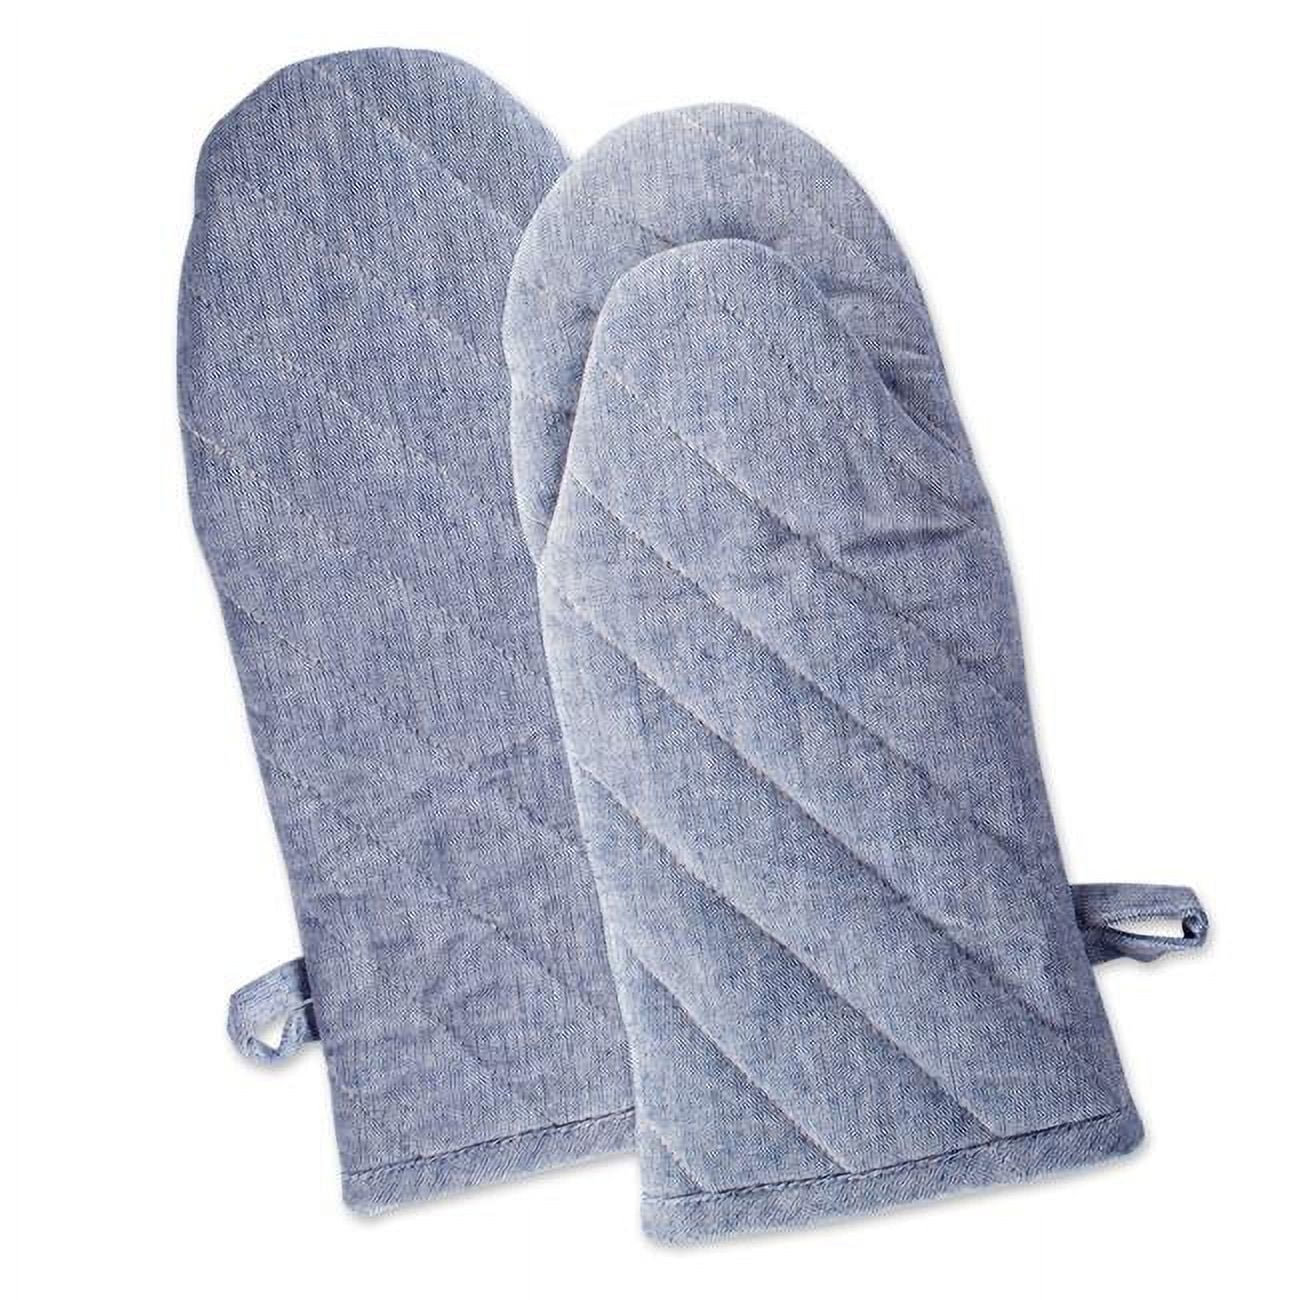 Design Imports Camz37726 Blue Solid Chambray Oven Mitt - Set Of 2